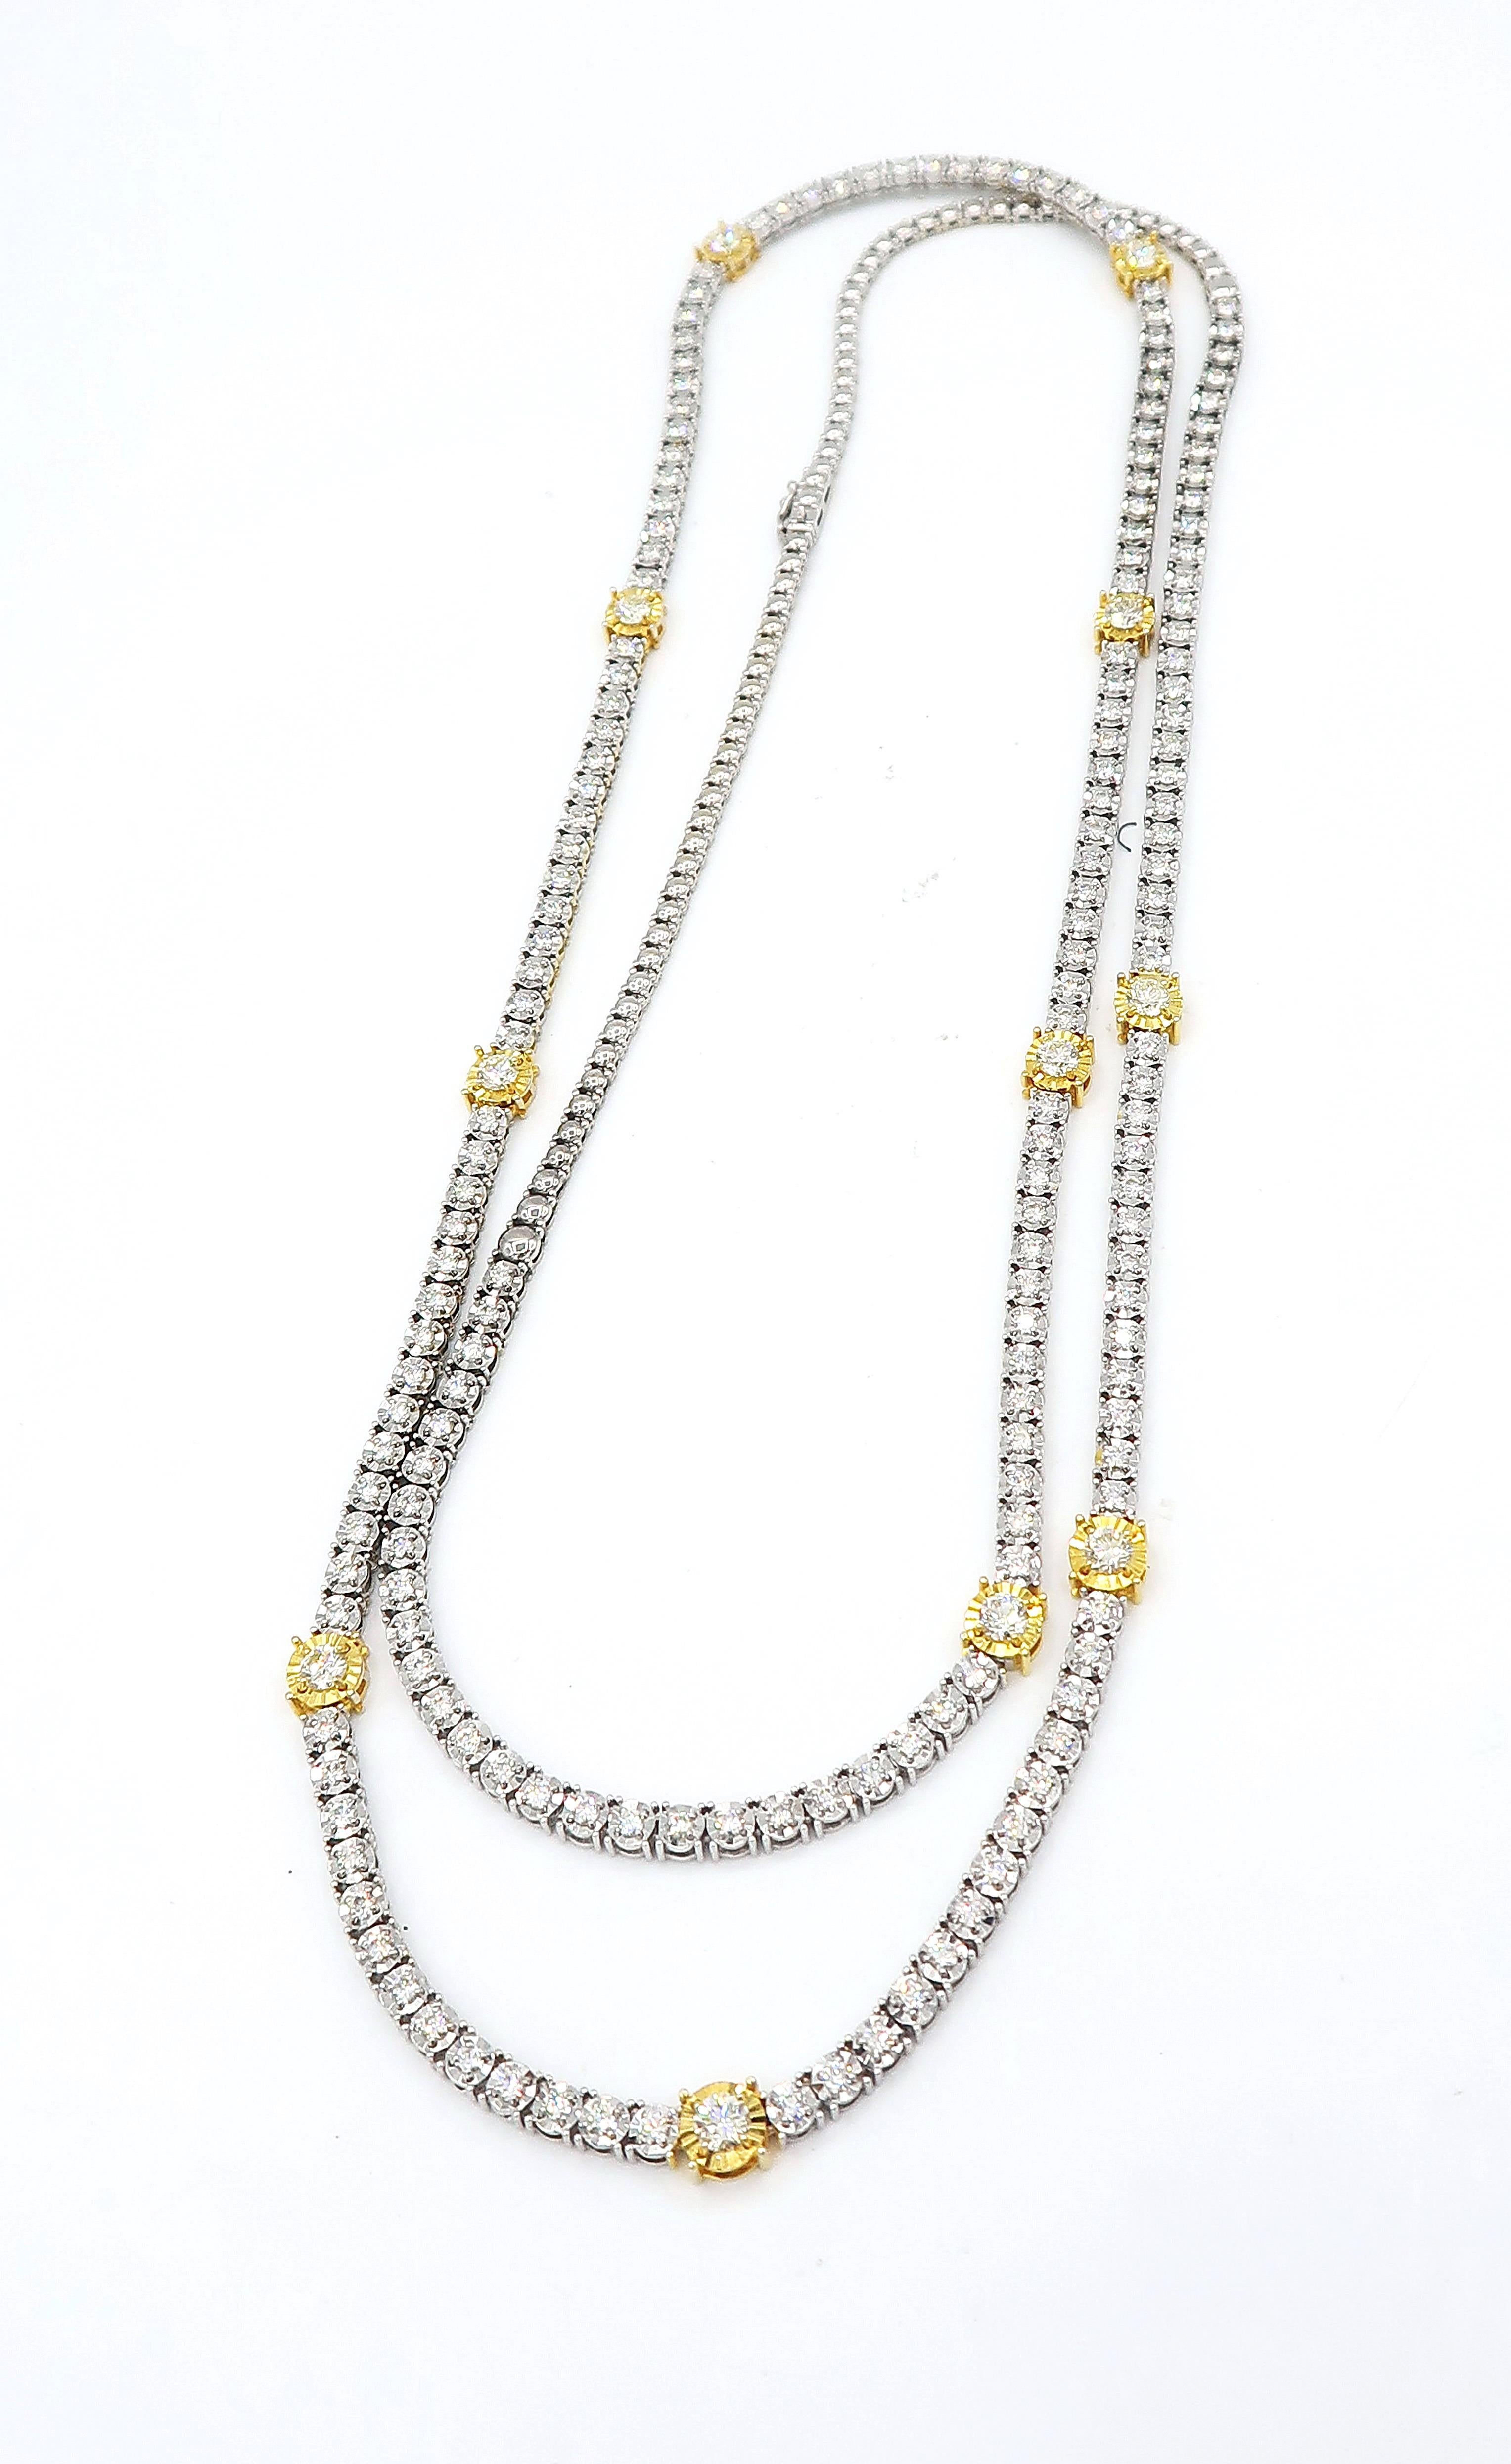 Enlarging Effect Diamond Long Necklace in 18 Karat White and Yellow Gold

Diamond: 8.77cts.
Gold: 18K 63.86g.